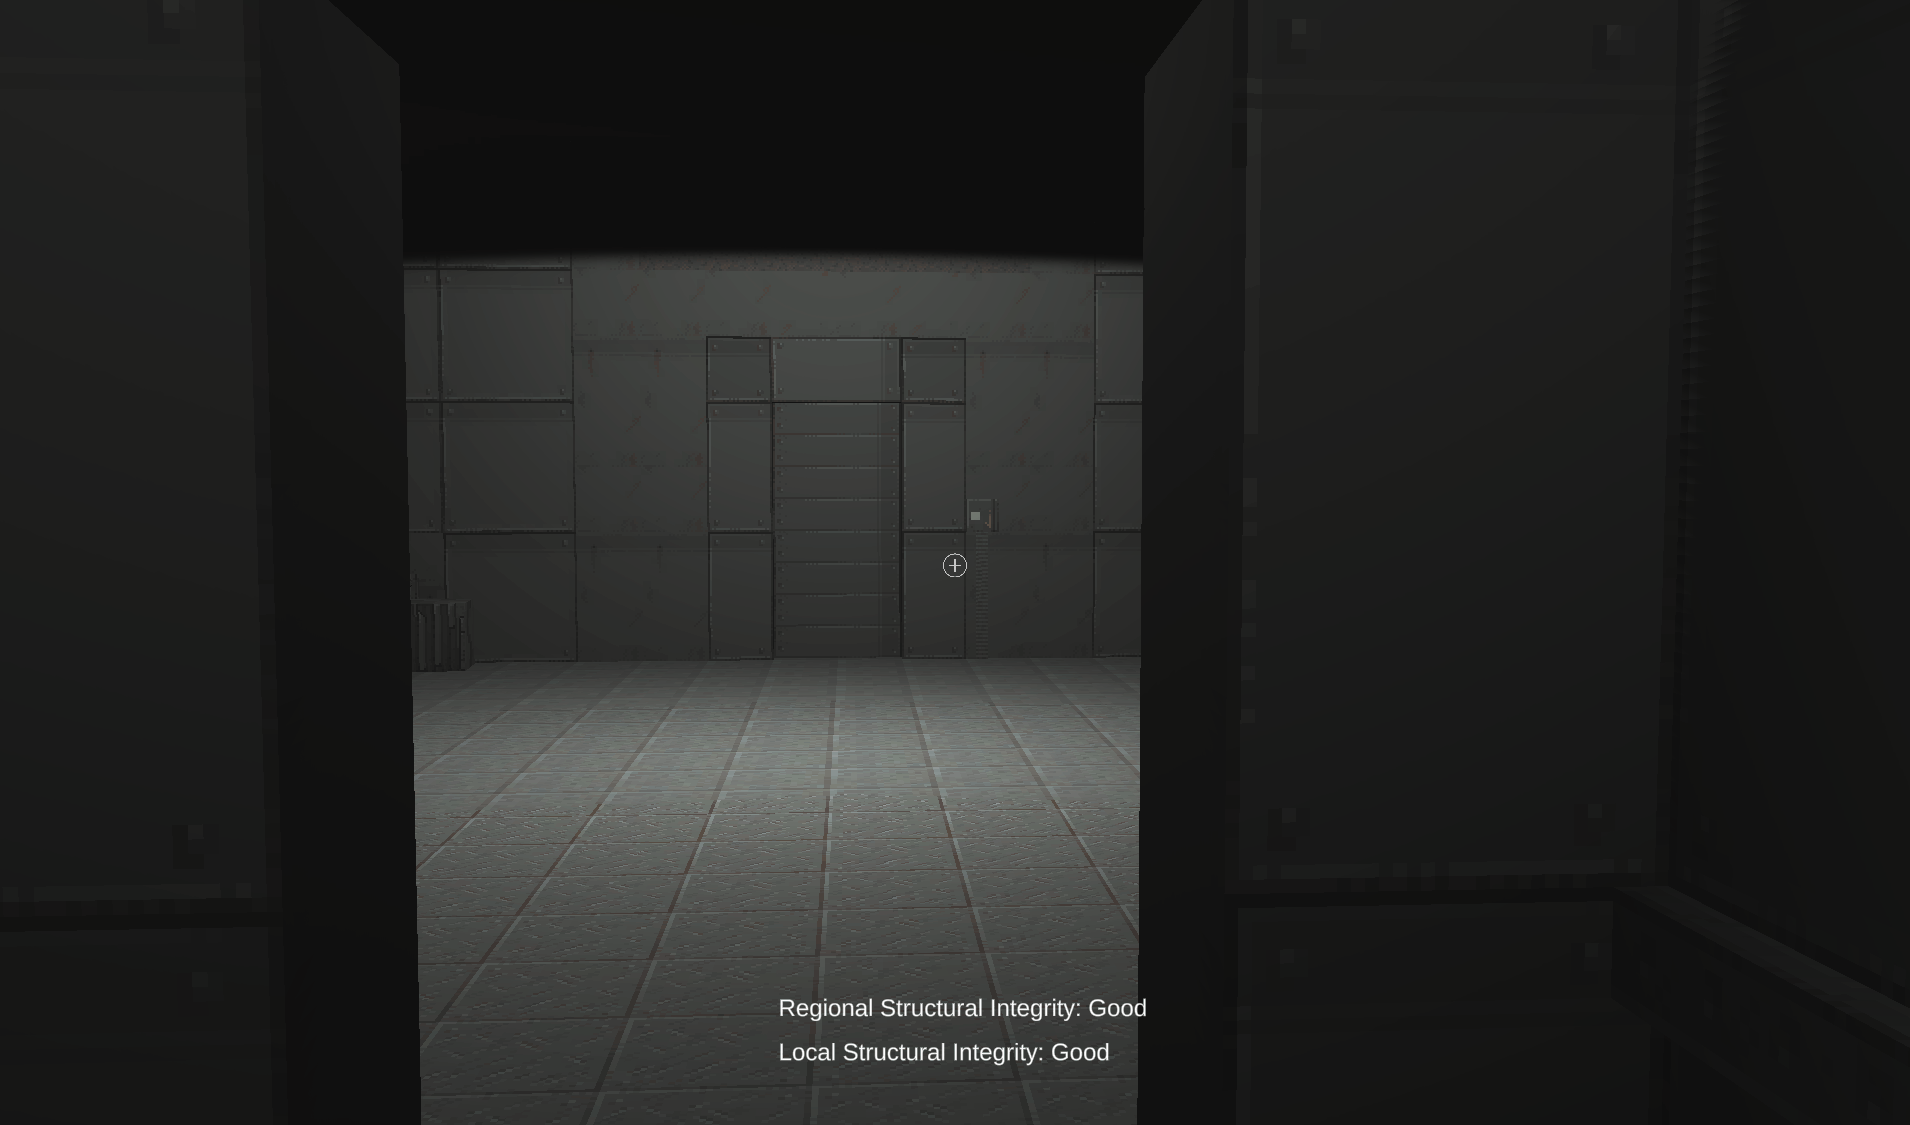 An animated gif in first person perspective of the viewer moving into a room and approaching a key-card swiping panel next to a door, and getting a notification that the panel requires power.